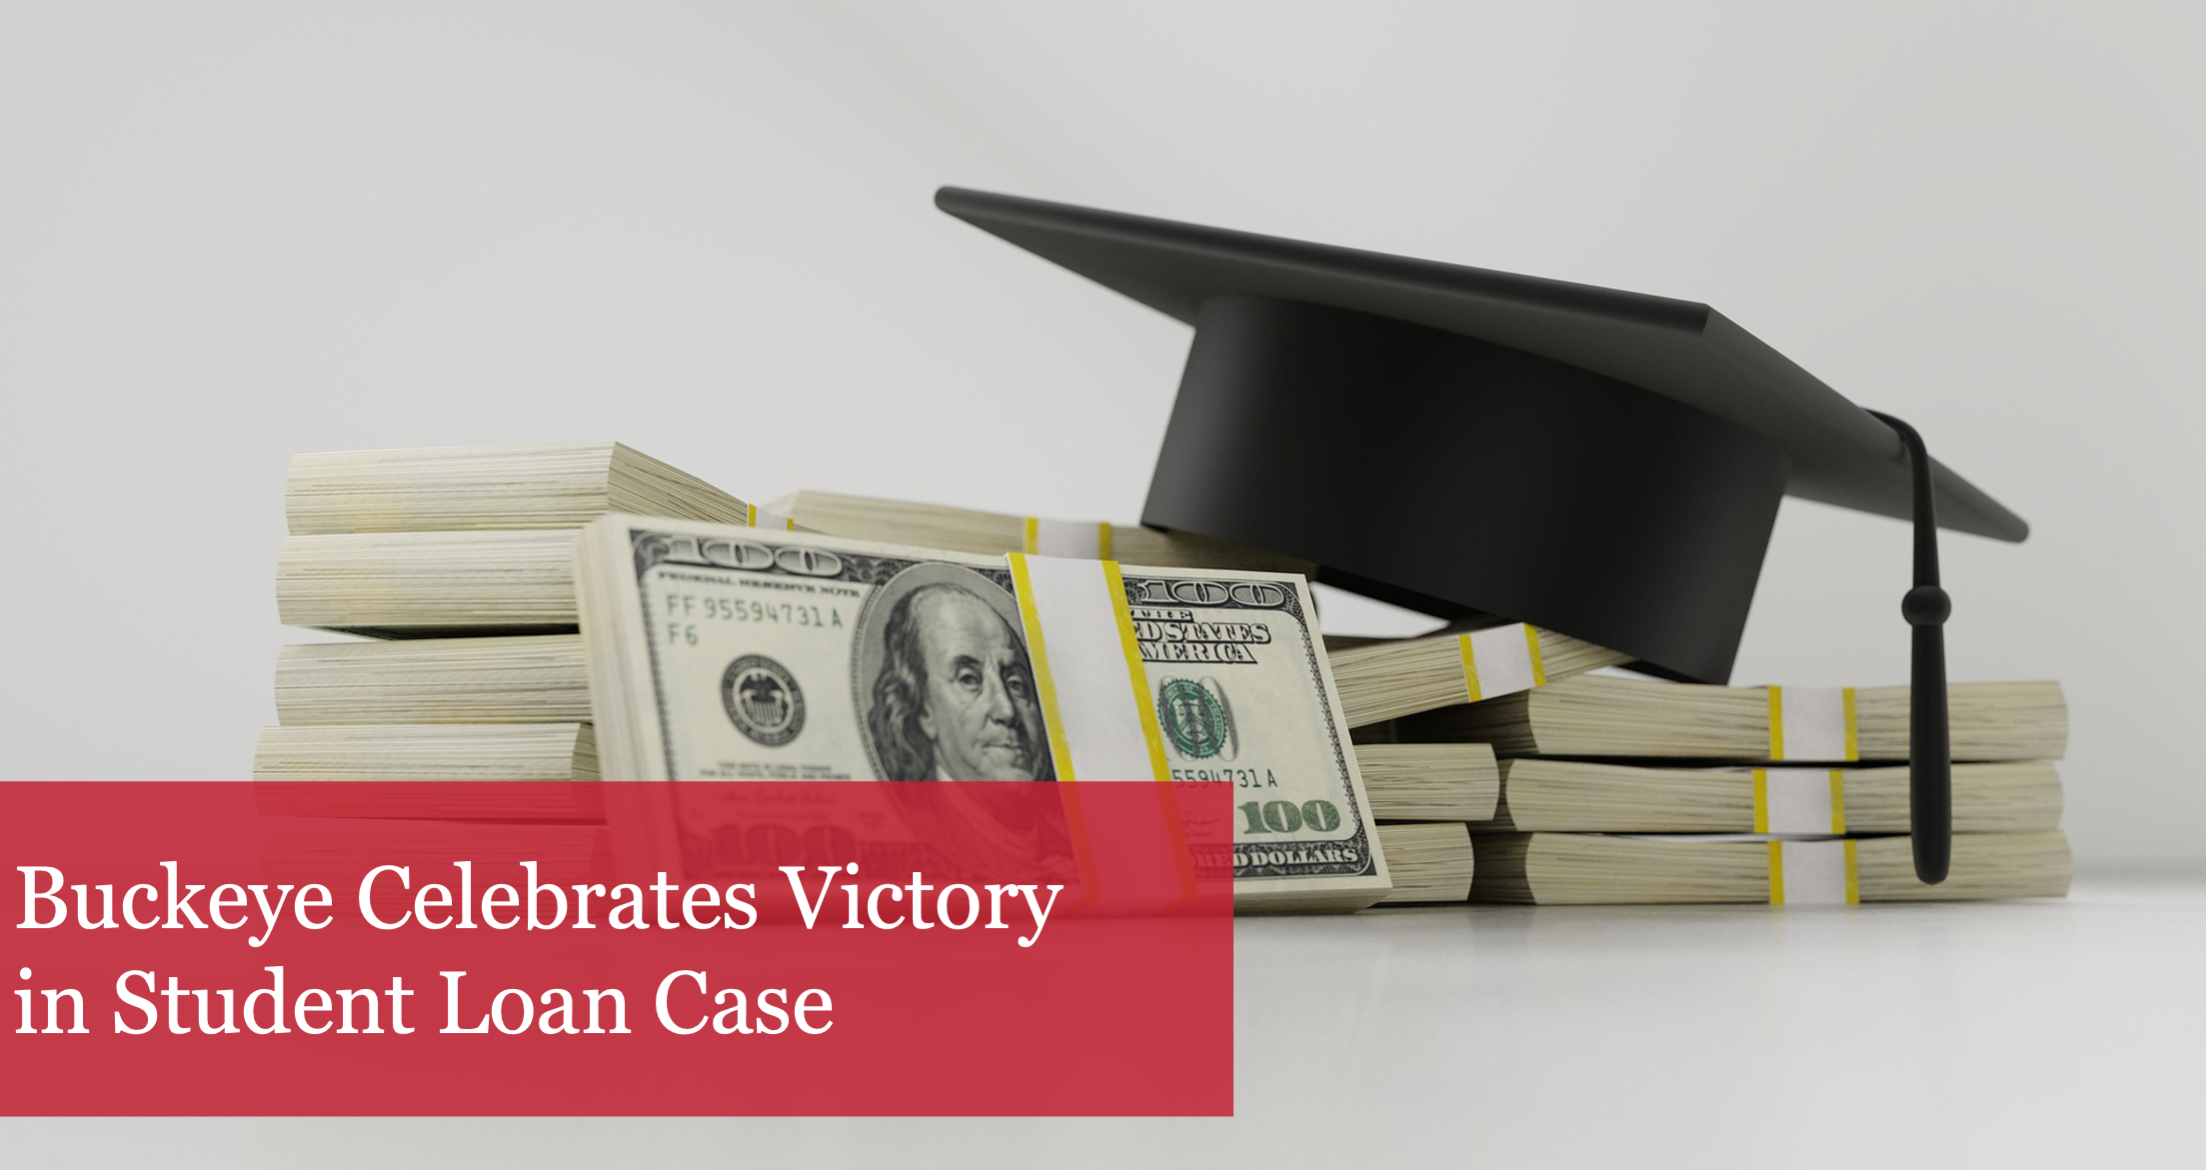 The Buckeye Institute Celebrates Victory in Student Loan Case